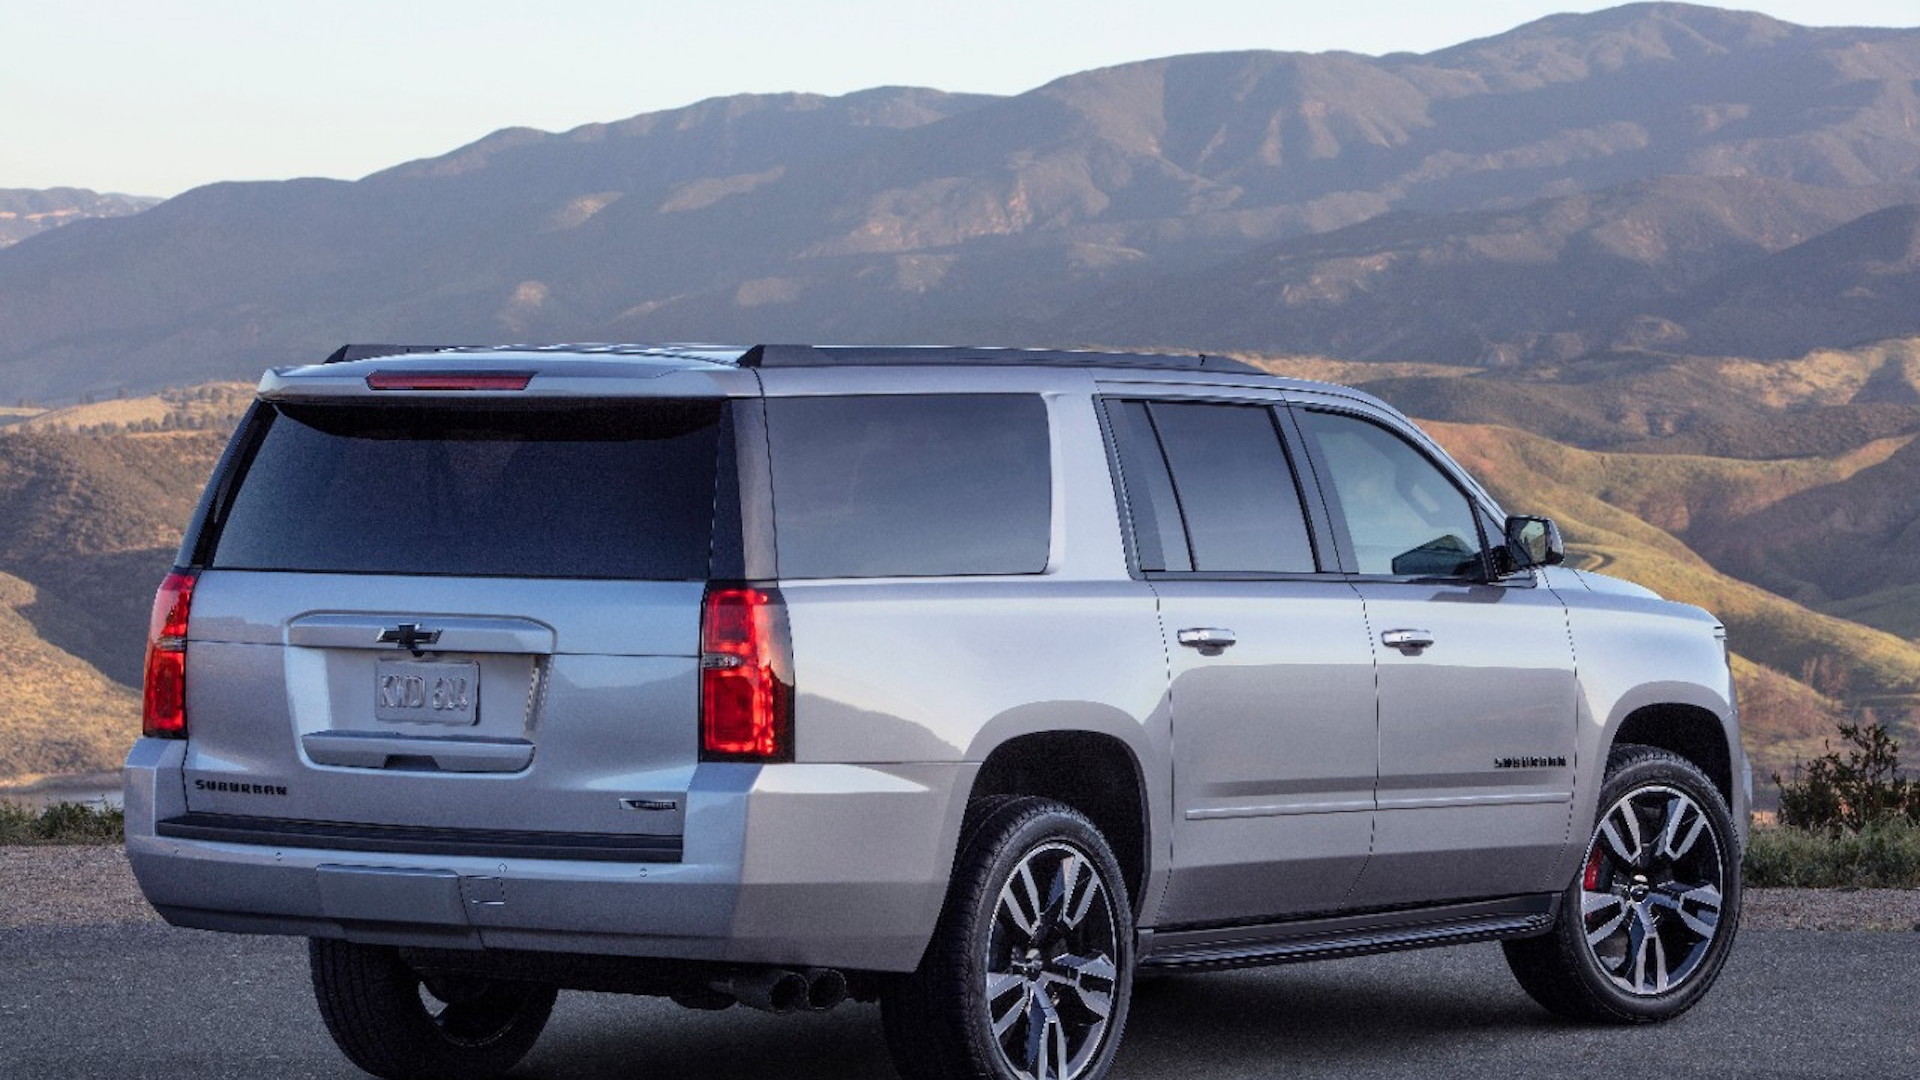 2019 Chevrolet Suburban RST Performance Package